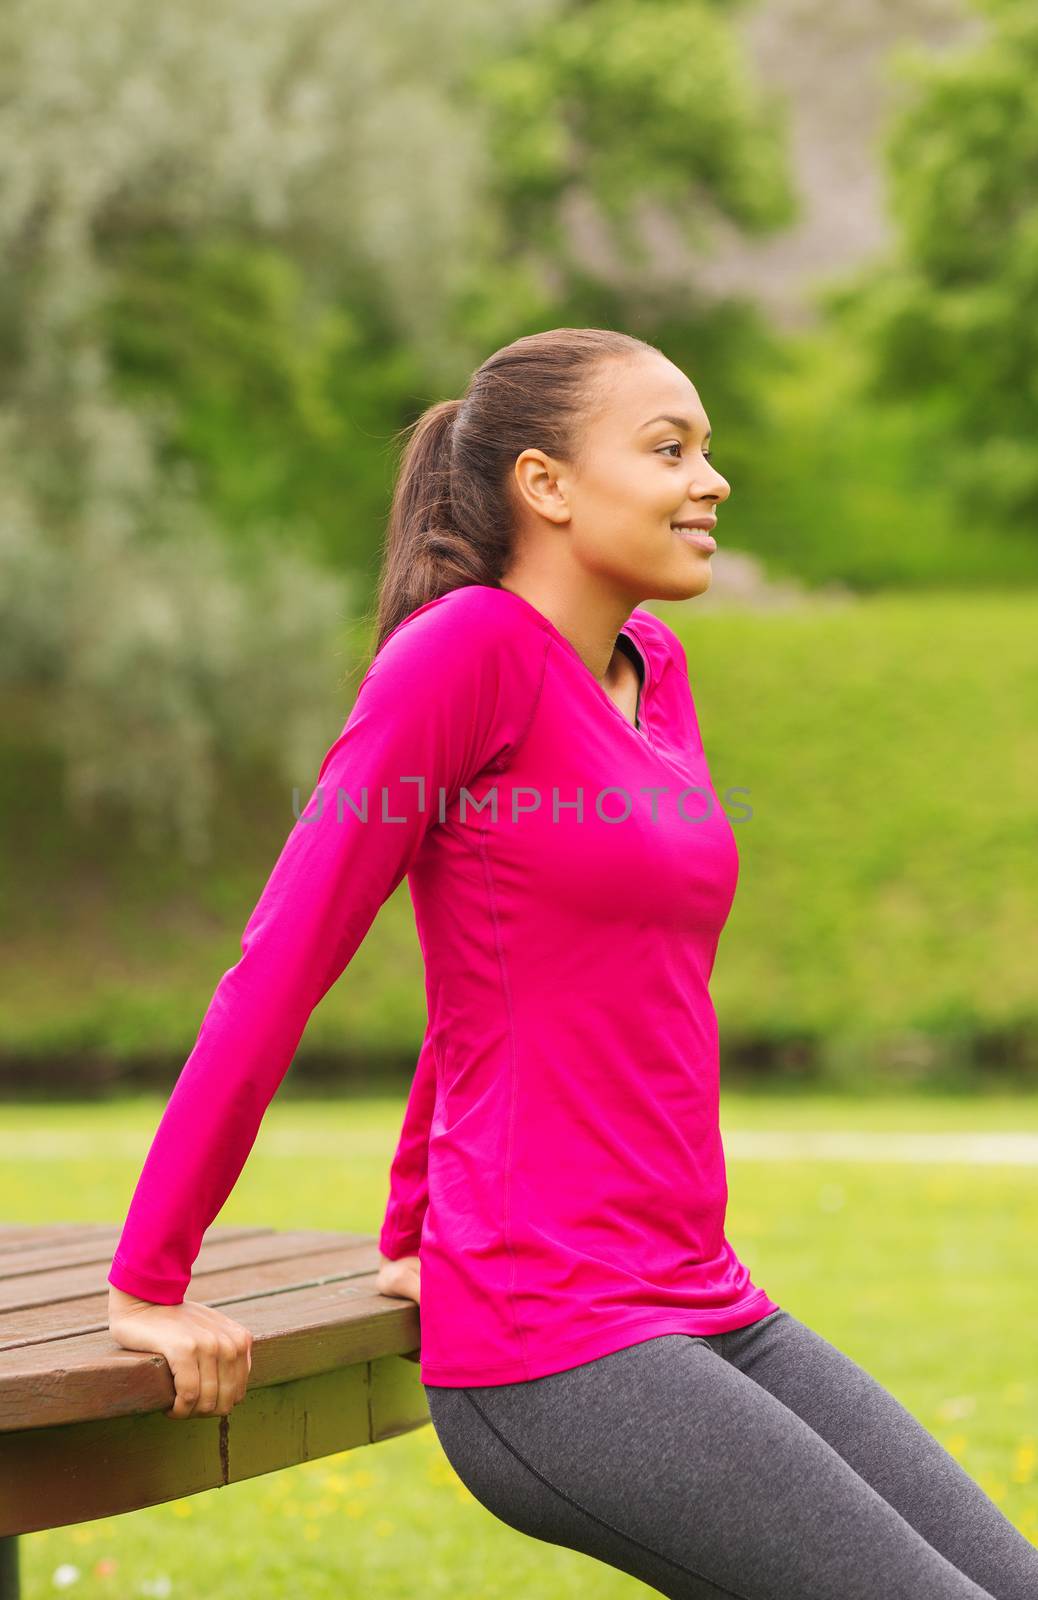 smiling woman doing push-ups on bench outdoors by dolgachov